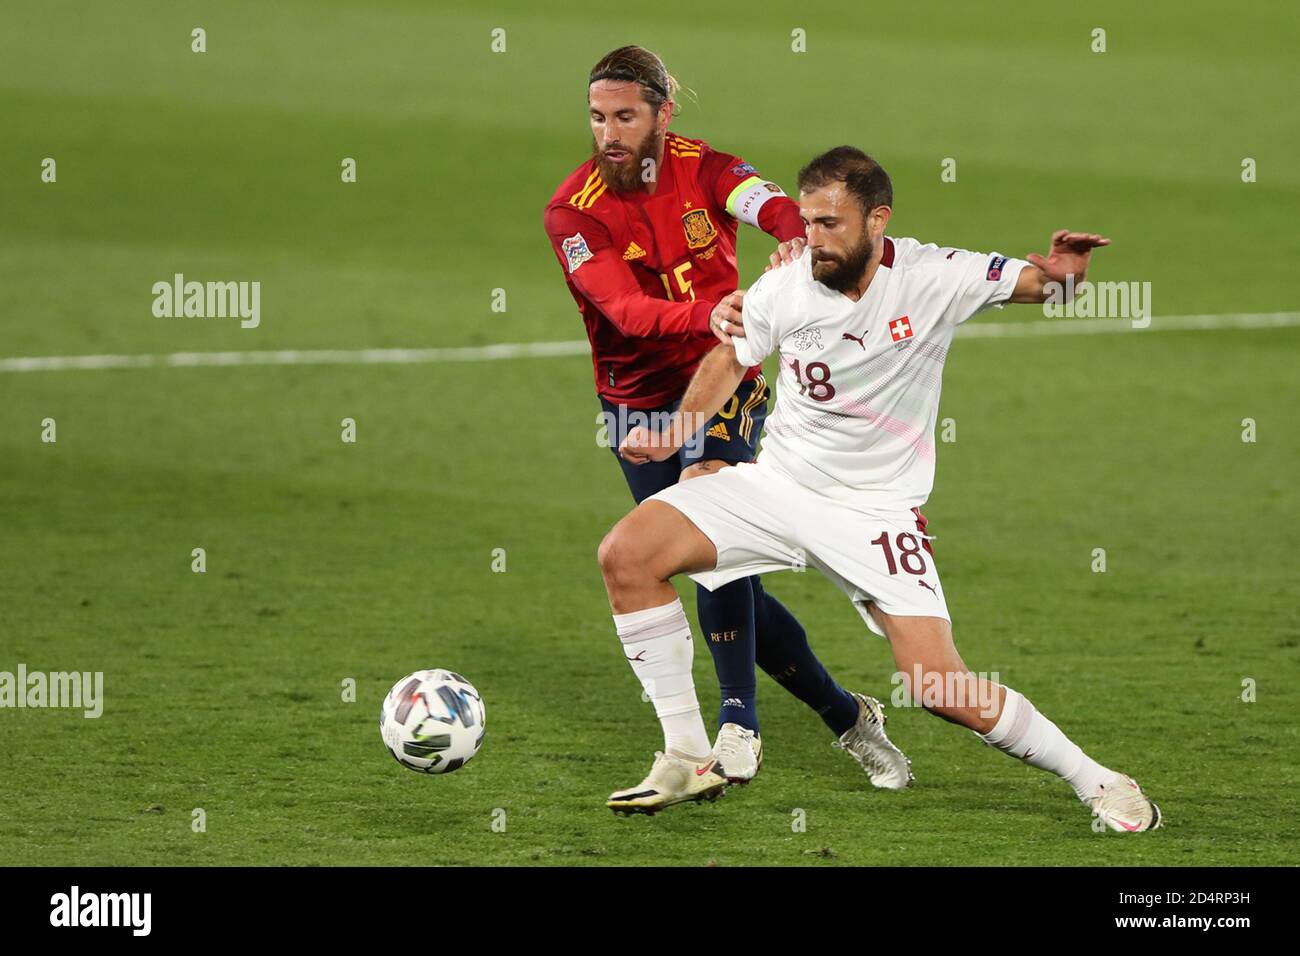 Madrid, Spain. 10th Oct, 2020. Spain's Sergio Ramos (L) vies with Switzerland's Admir Mehmedi during the UEFA Nations League football group match between Spain and Switzerland in Madrid, Spain, Oct. 10, 2020. Credit: Edward F. Peters/Xinhua/Alamy Live News Stock Photo